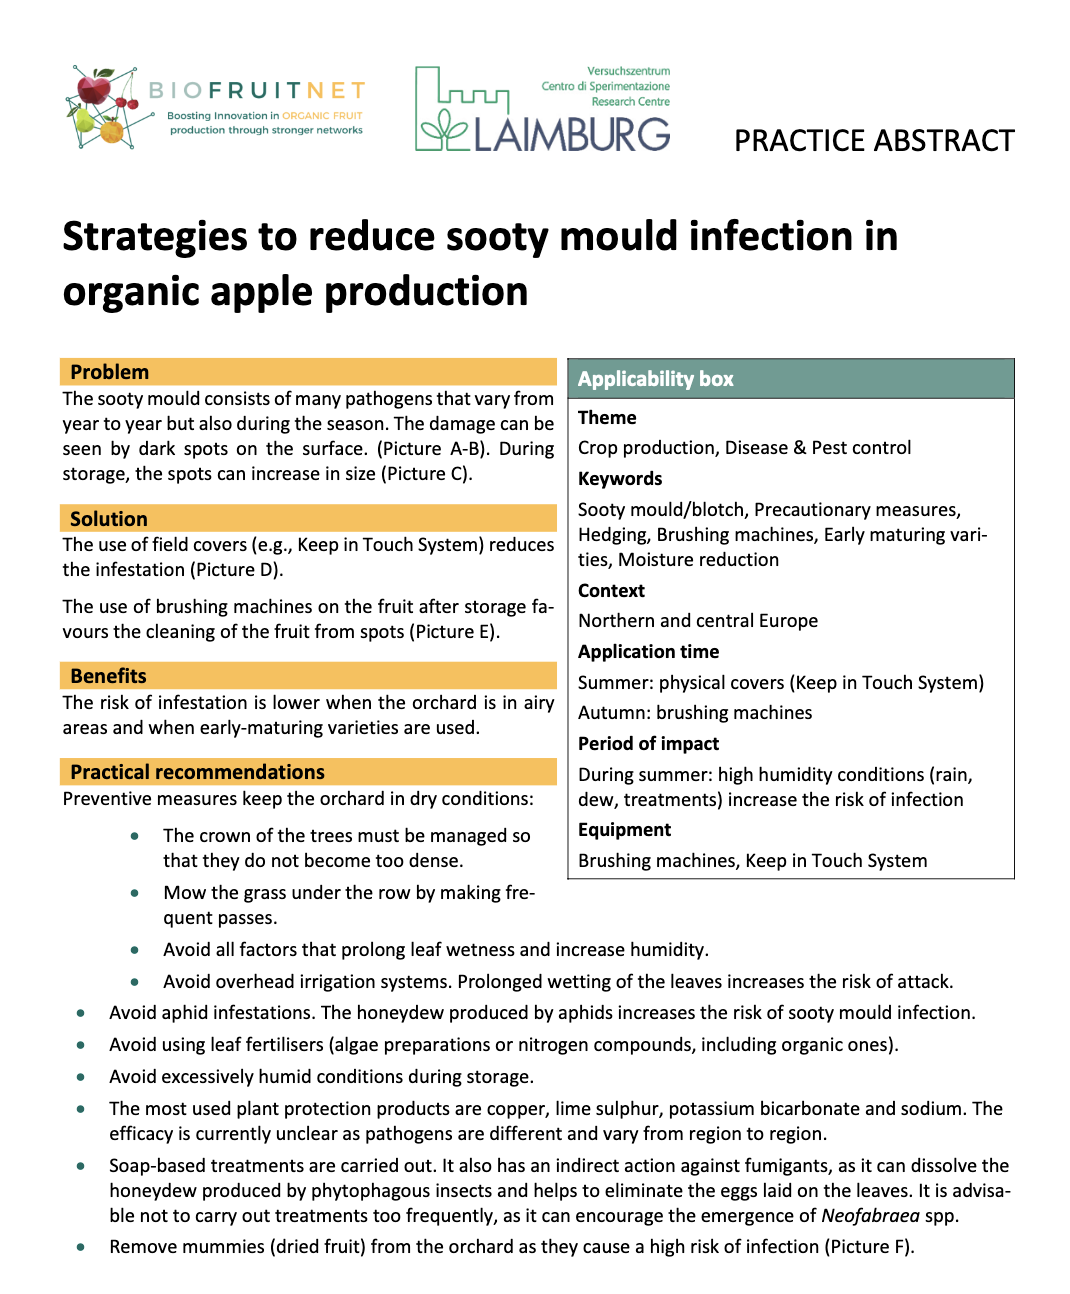 Strategies to reduce sooty mould infection in organic apple production (BIOFRUITNET Practice Abstract)